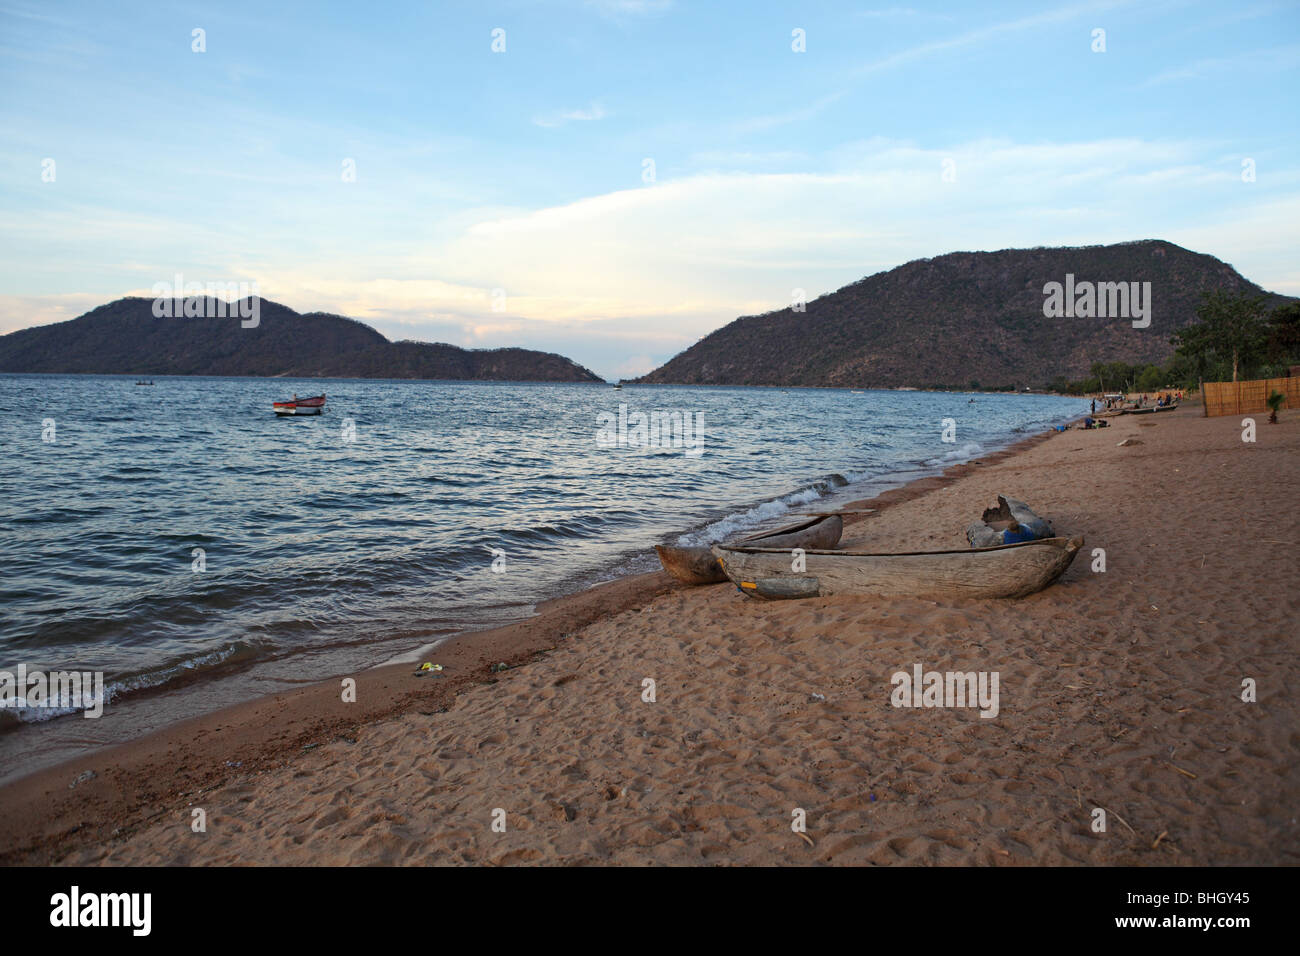 A dugout mekoro canoe sits on the edge of Lake Malawi in the village of Chembe, Cape Maclear, Malawi Stock Photo